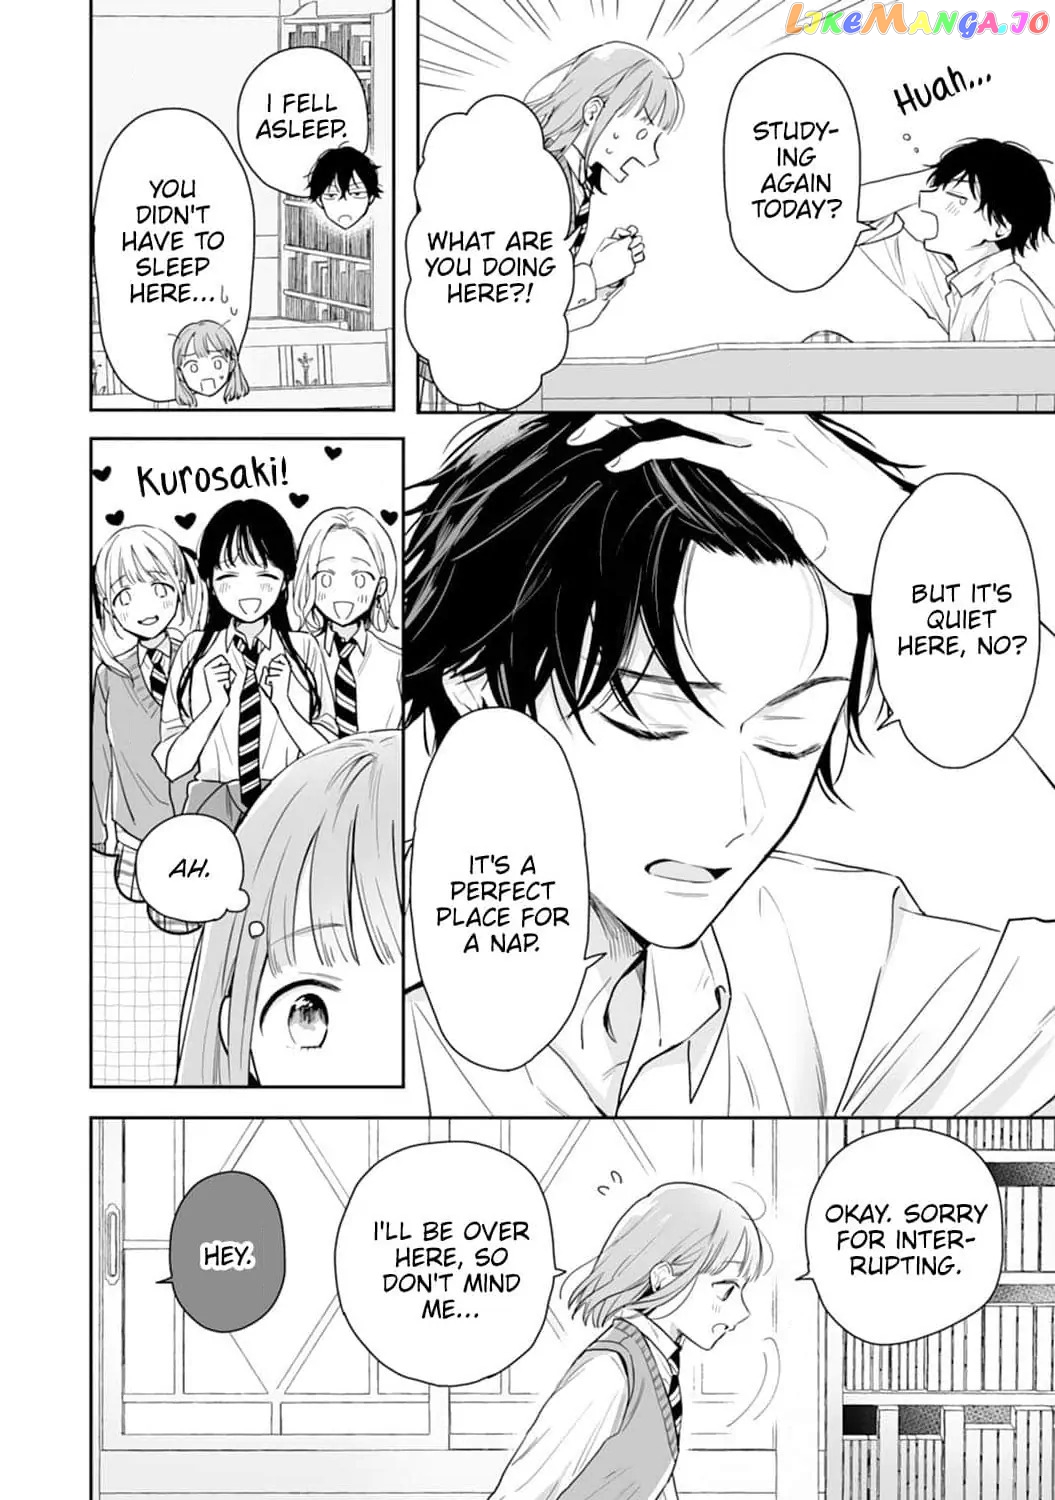 Kurosaki Wants Me All to Himself ~The Intense Sweetness of First Love~ Chapter 1 - page 24